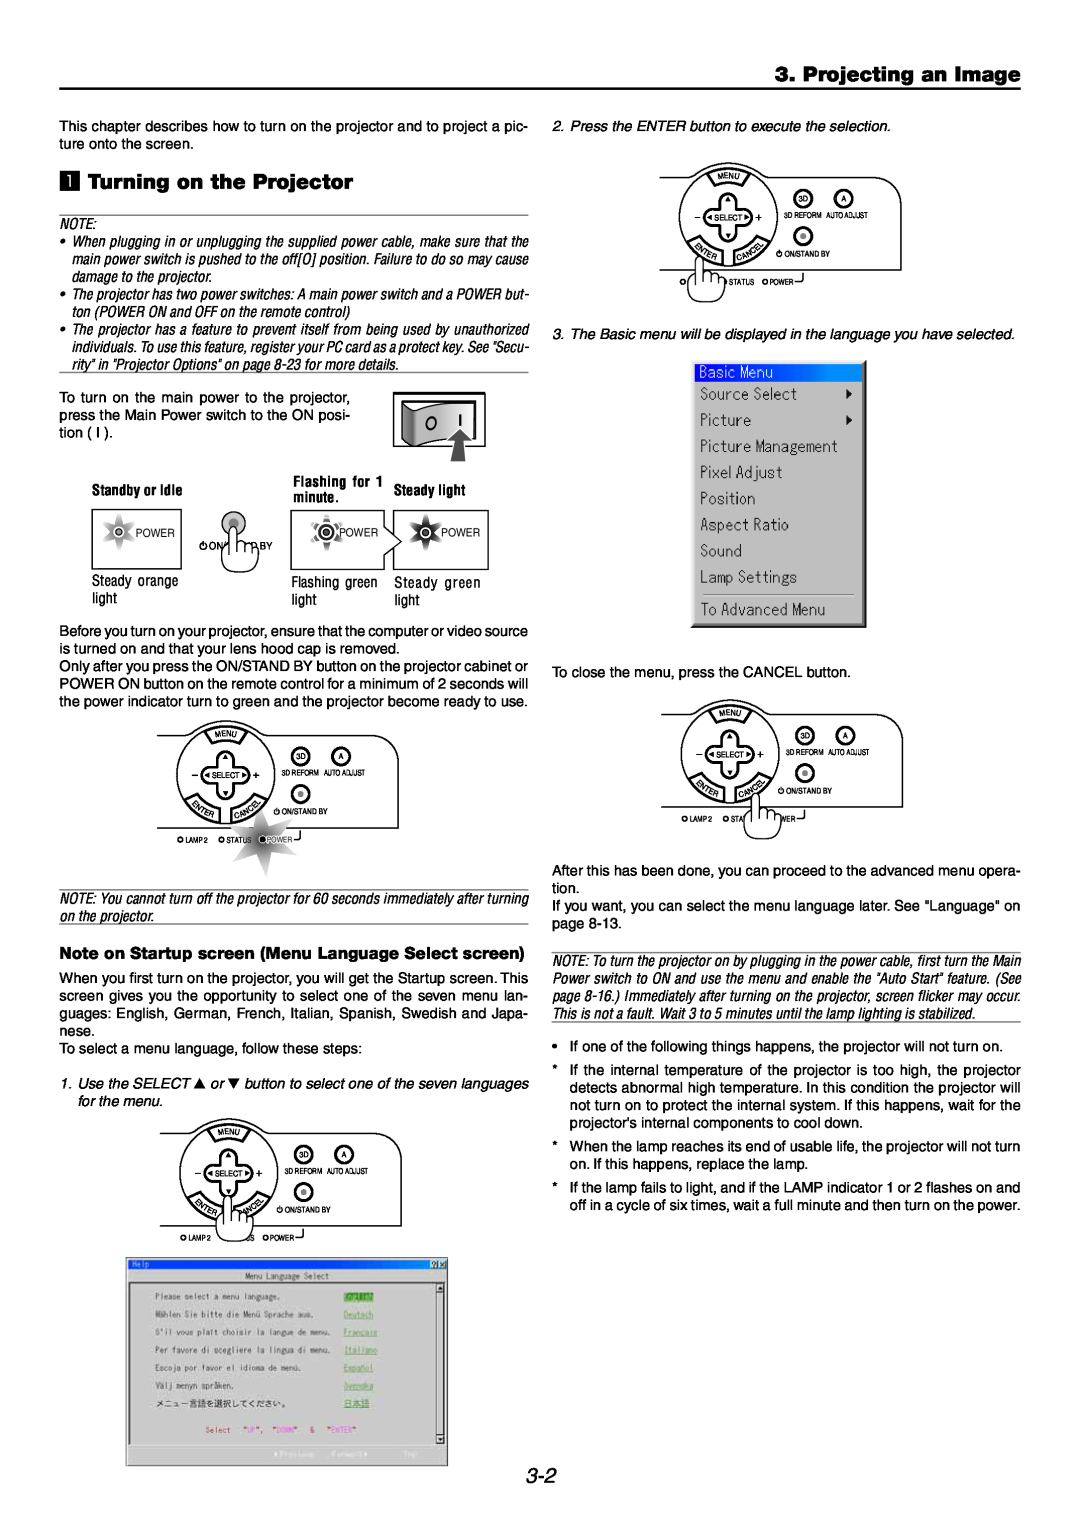 NEC GT6000 user manual Projecting an Image, z Turning on the Projector, Standby or Idle, Flashing for, Steady light, minute 